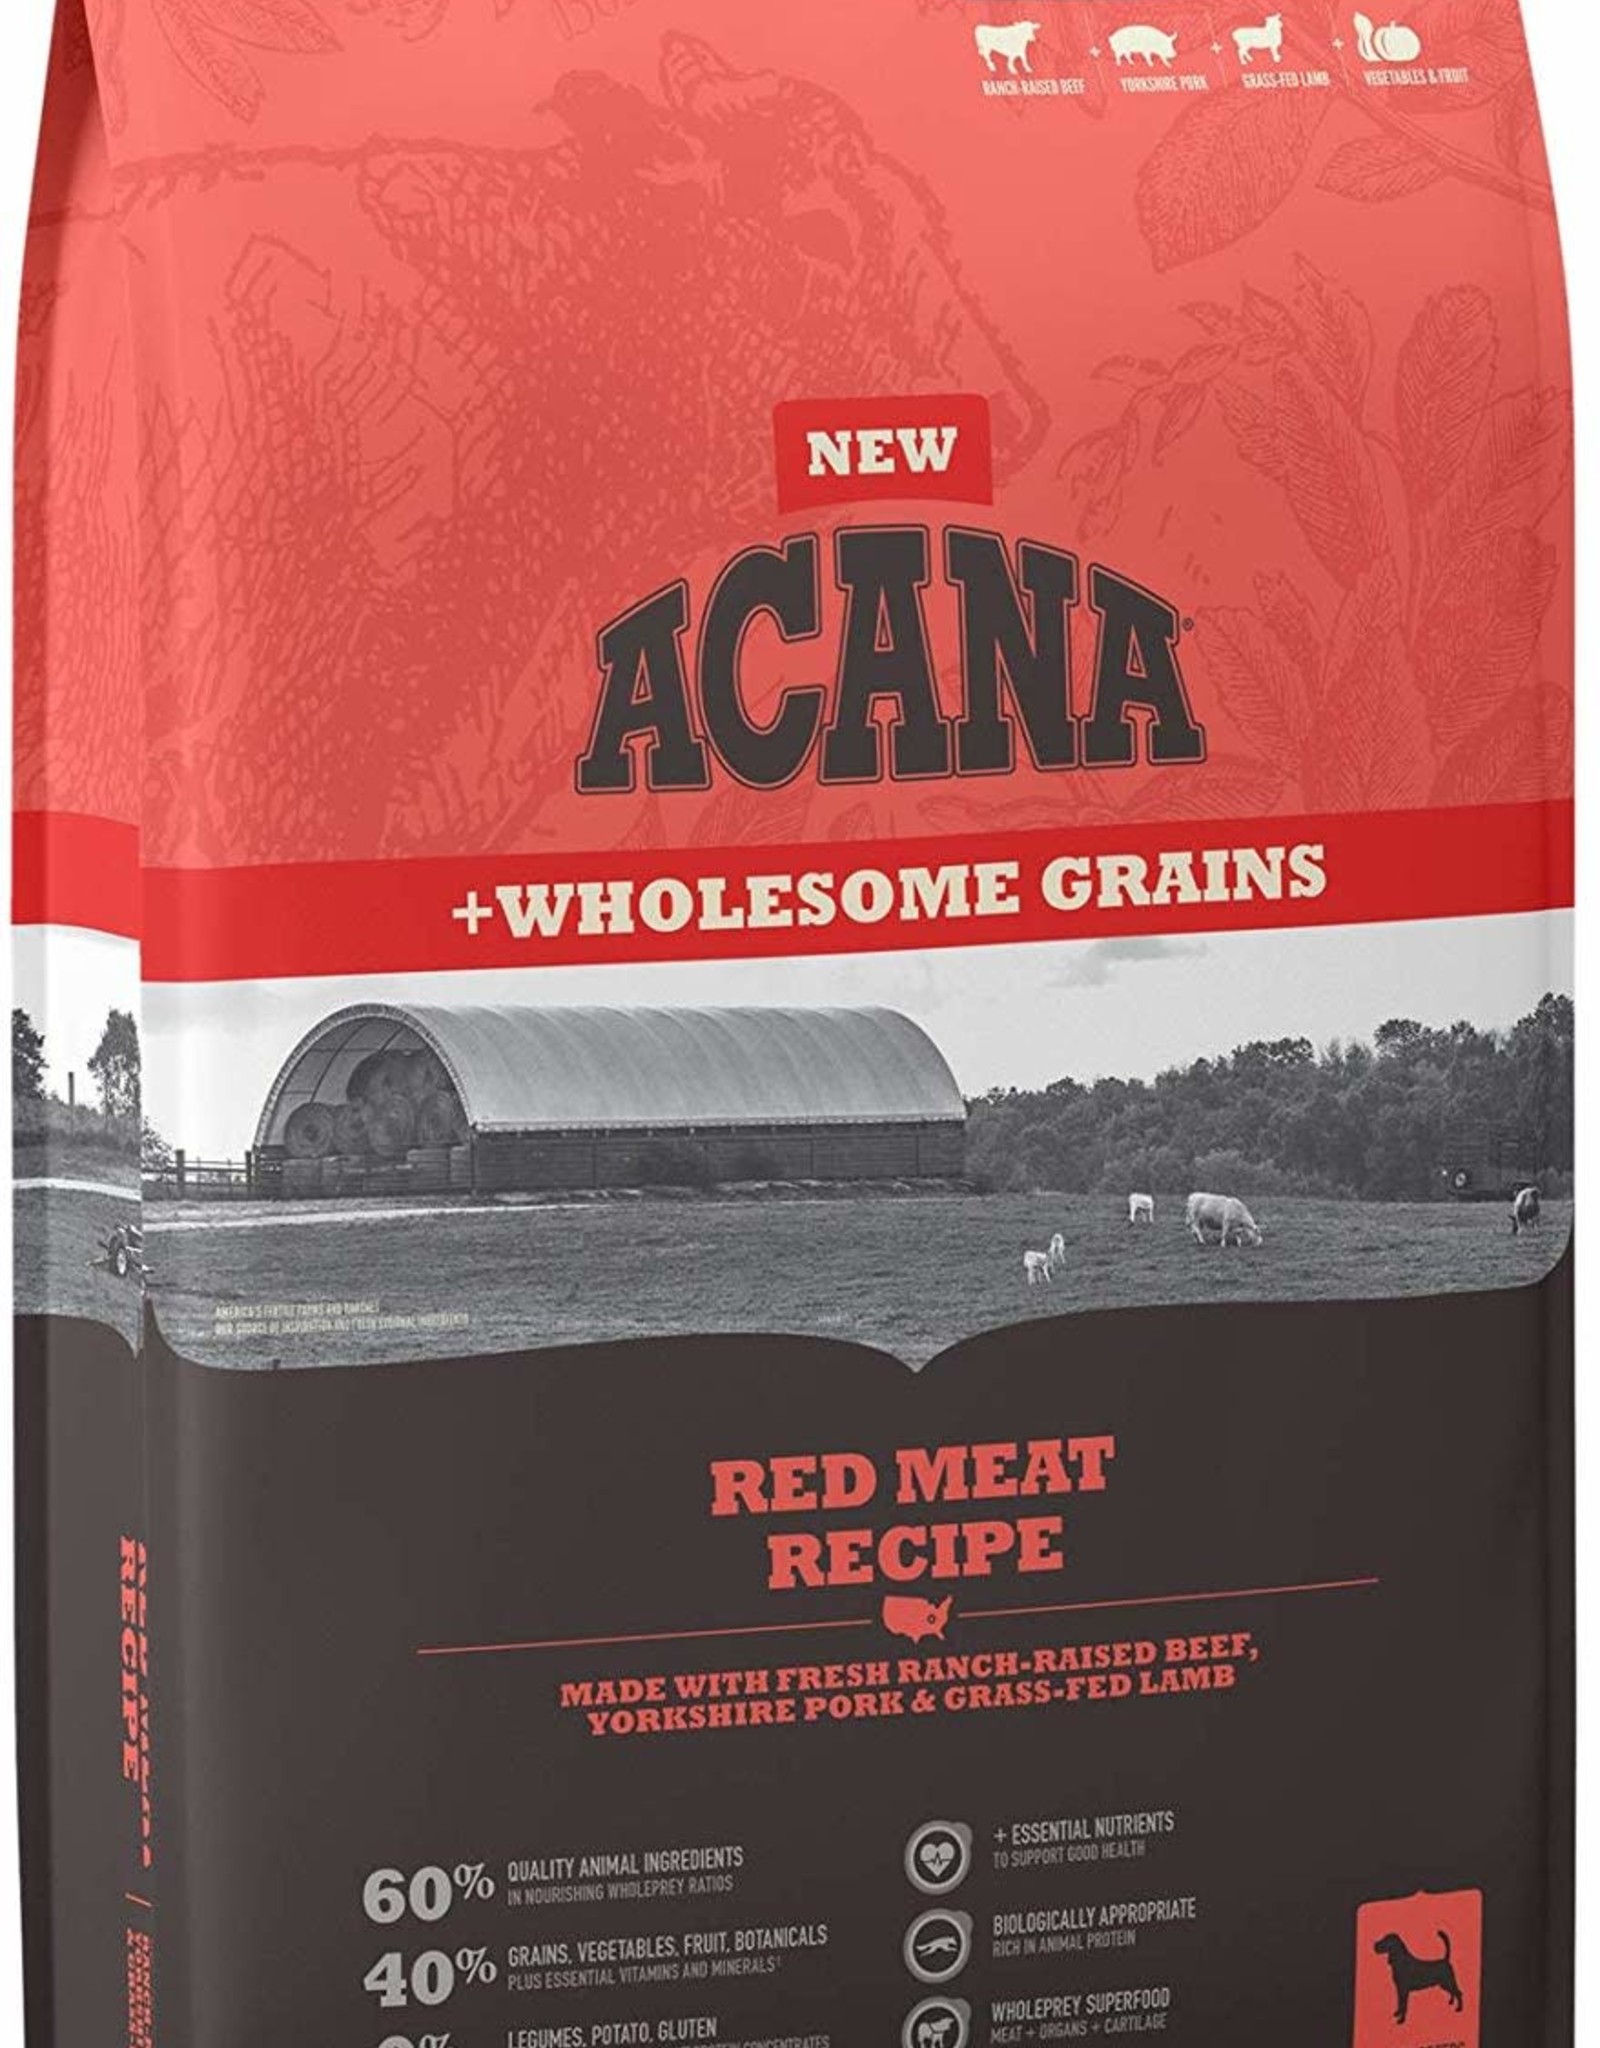 Champion Pet ACANA Red Meat + Wholesome Grains 22.5#